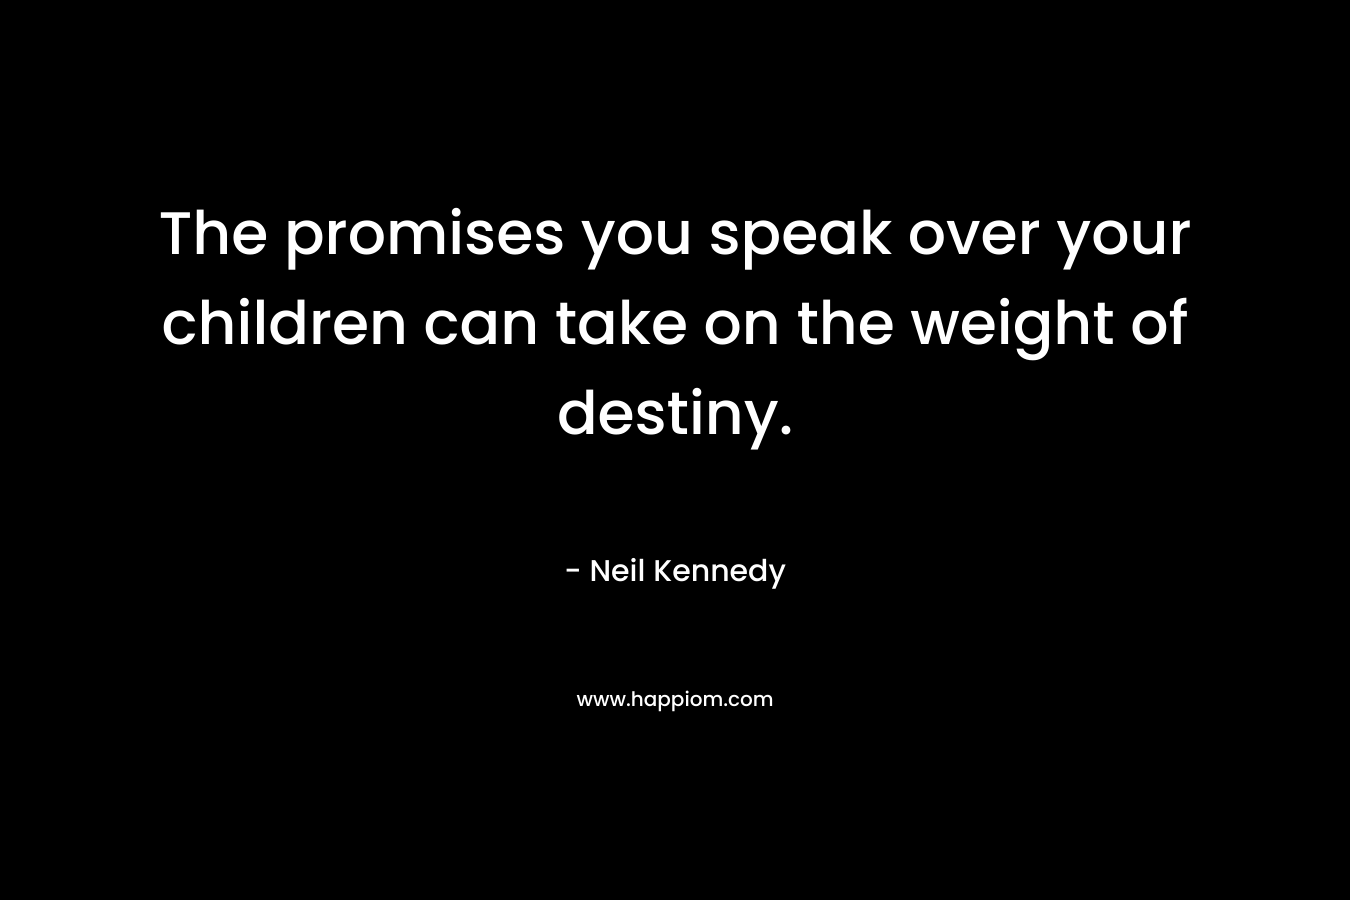 The promises you speak over your children can take on the weight of destiny. – Neil Kennedy